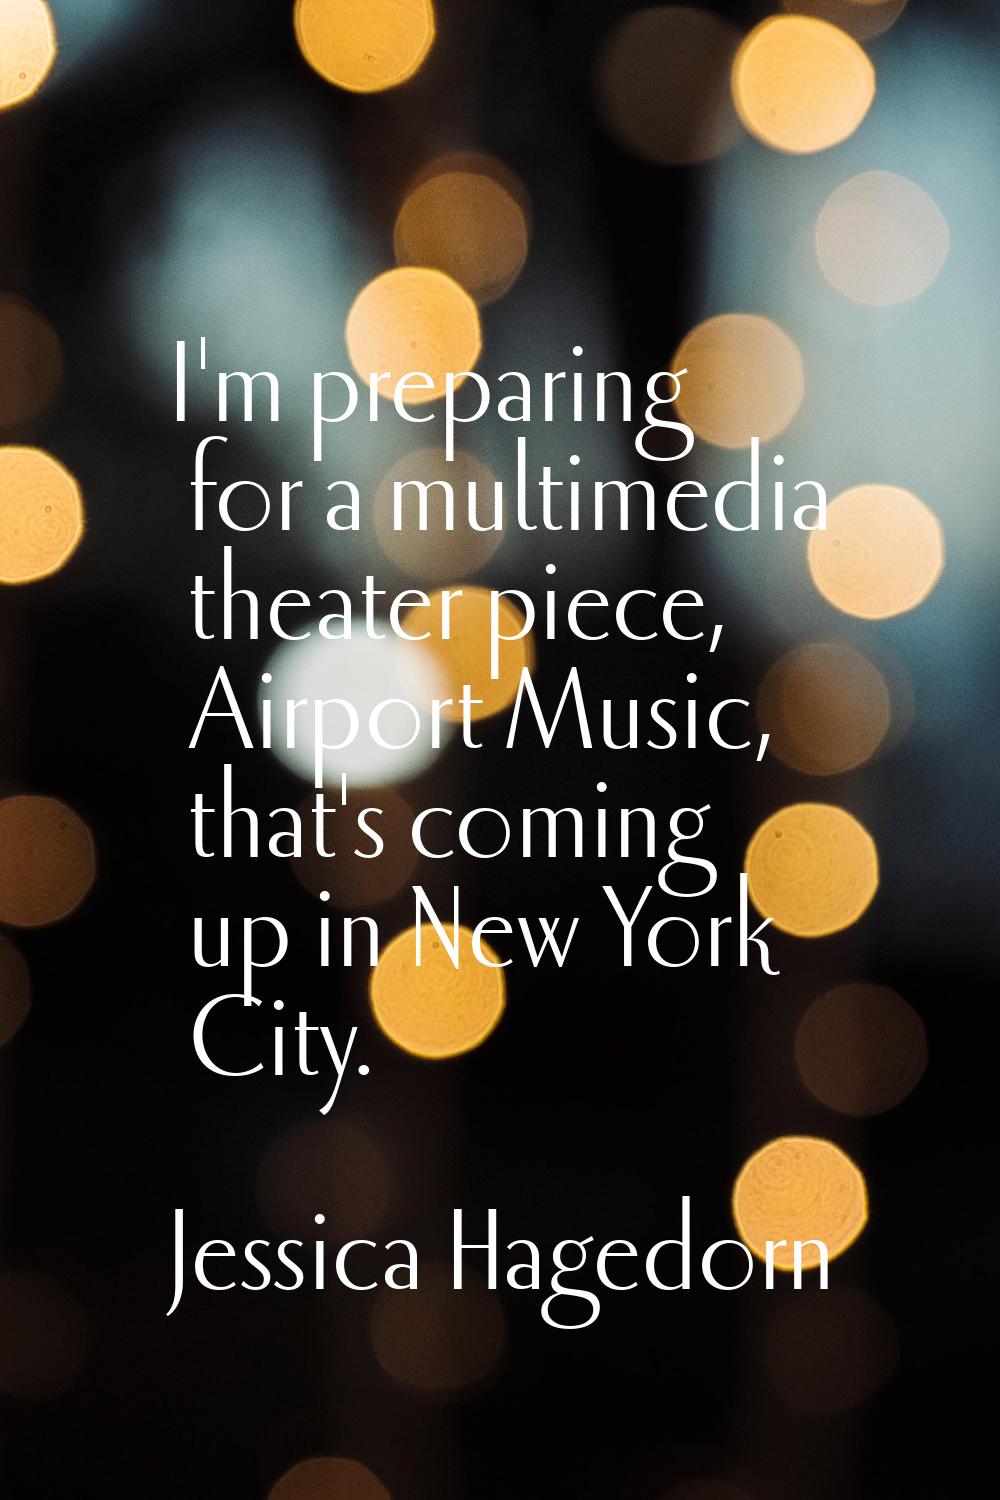 I'm preparing for a multimedia theater piece, Airport Music, that's coming up in New York City.